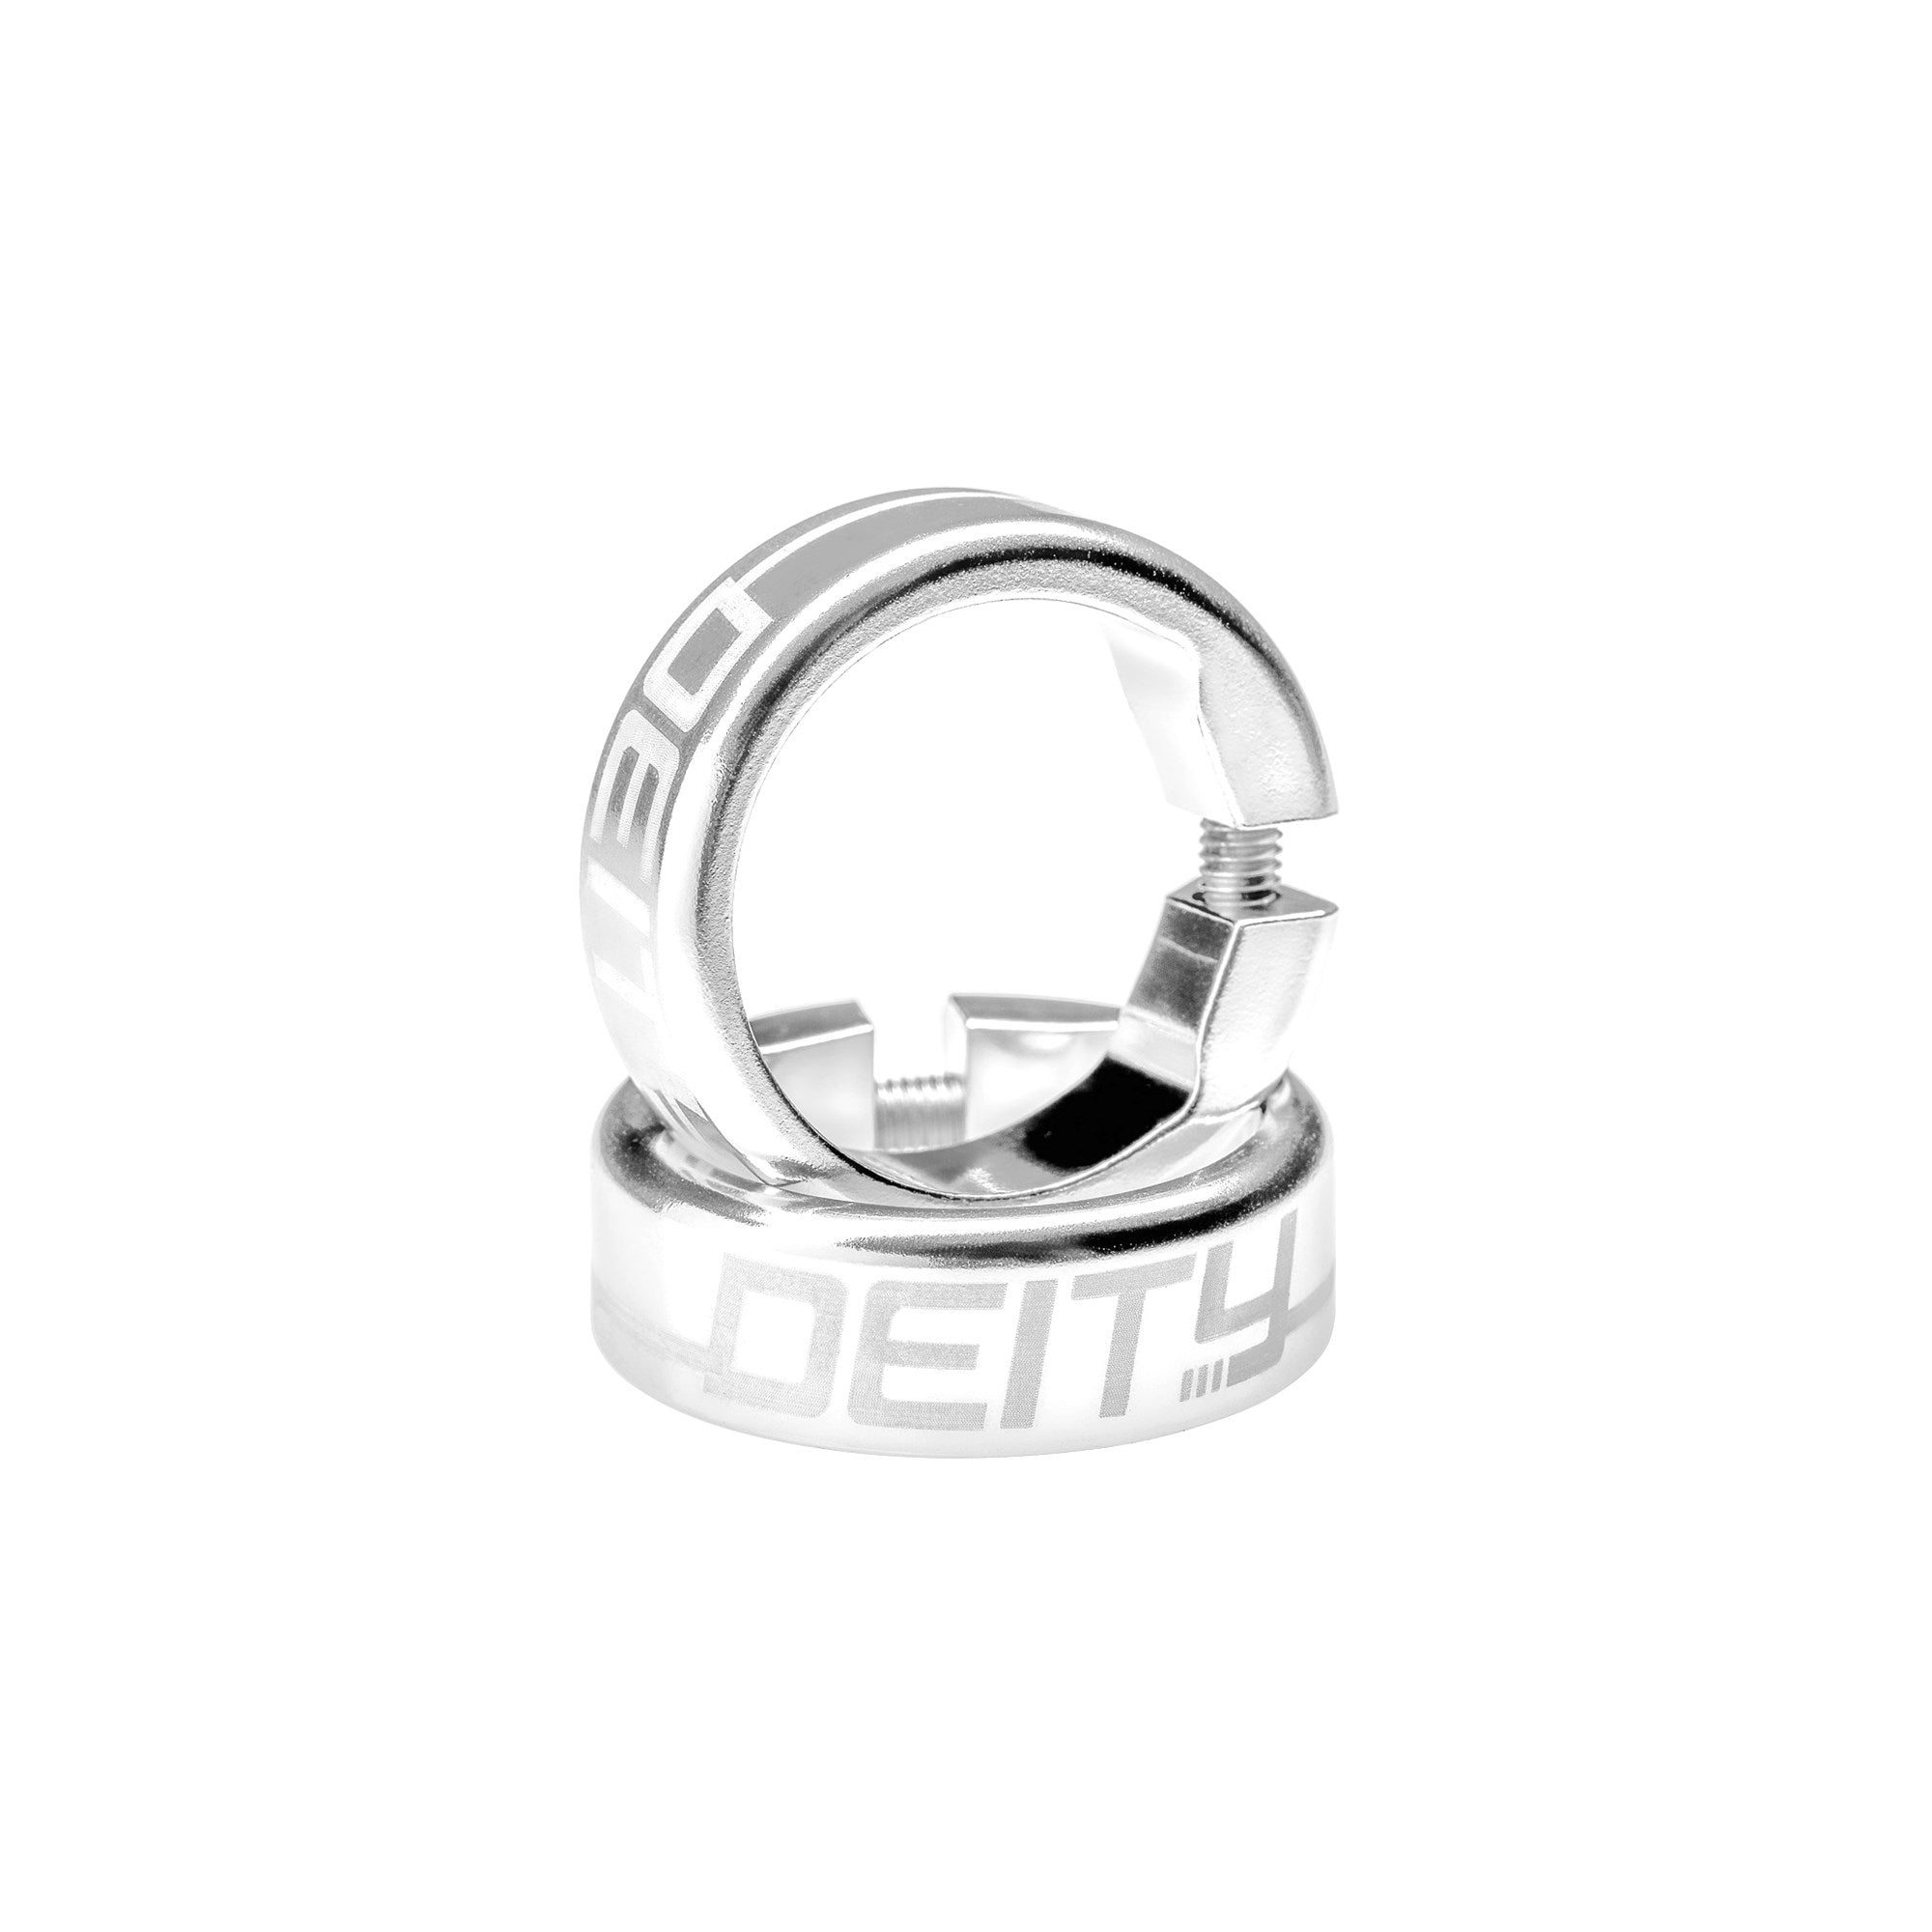 Deity grip clamps silver